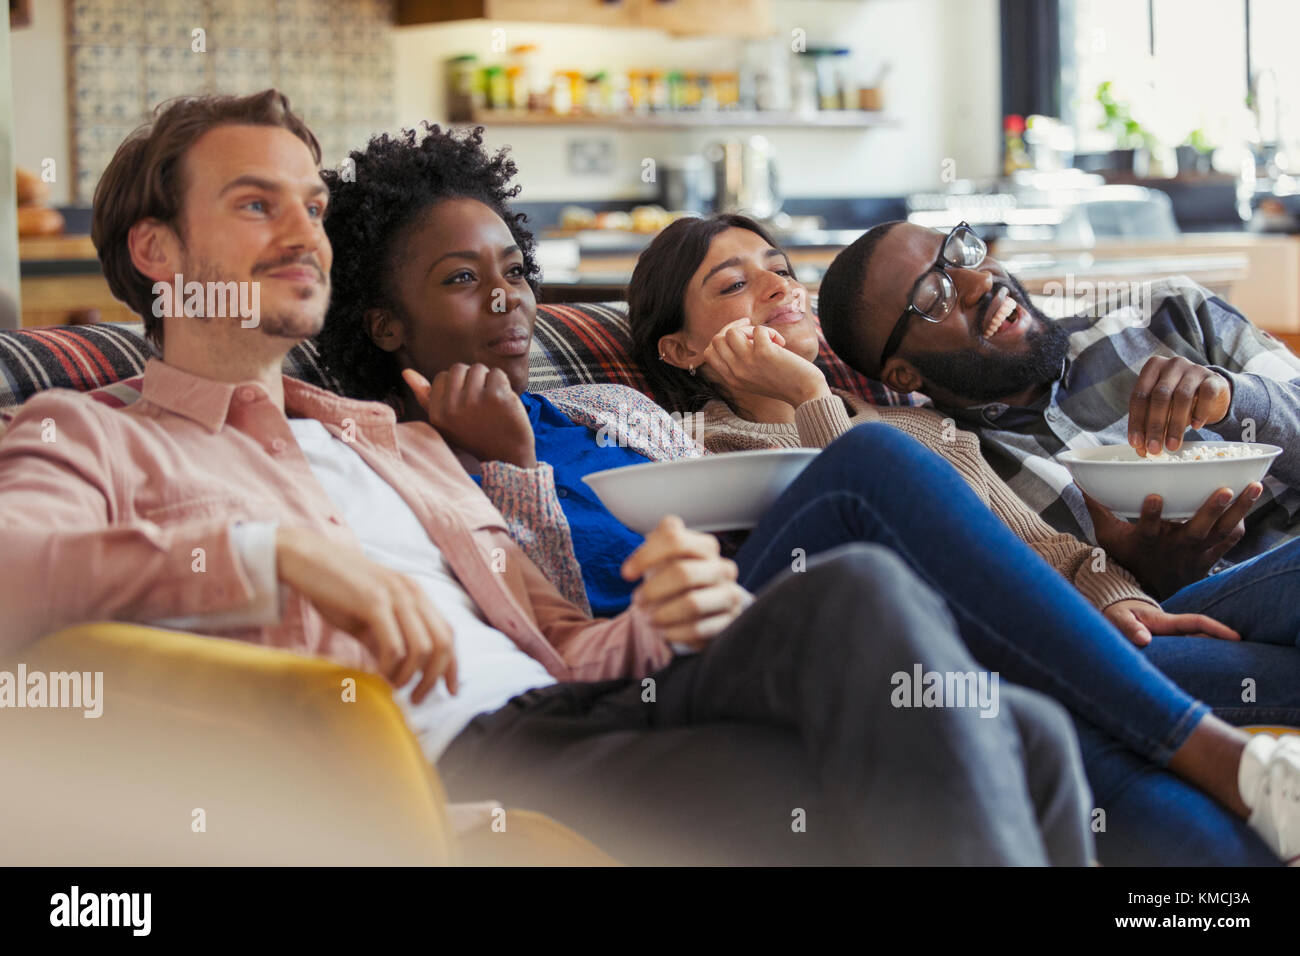 Couples watching TV and eating popcorn on living room sofa Stock Photo